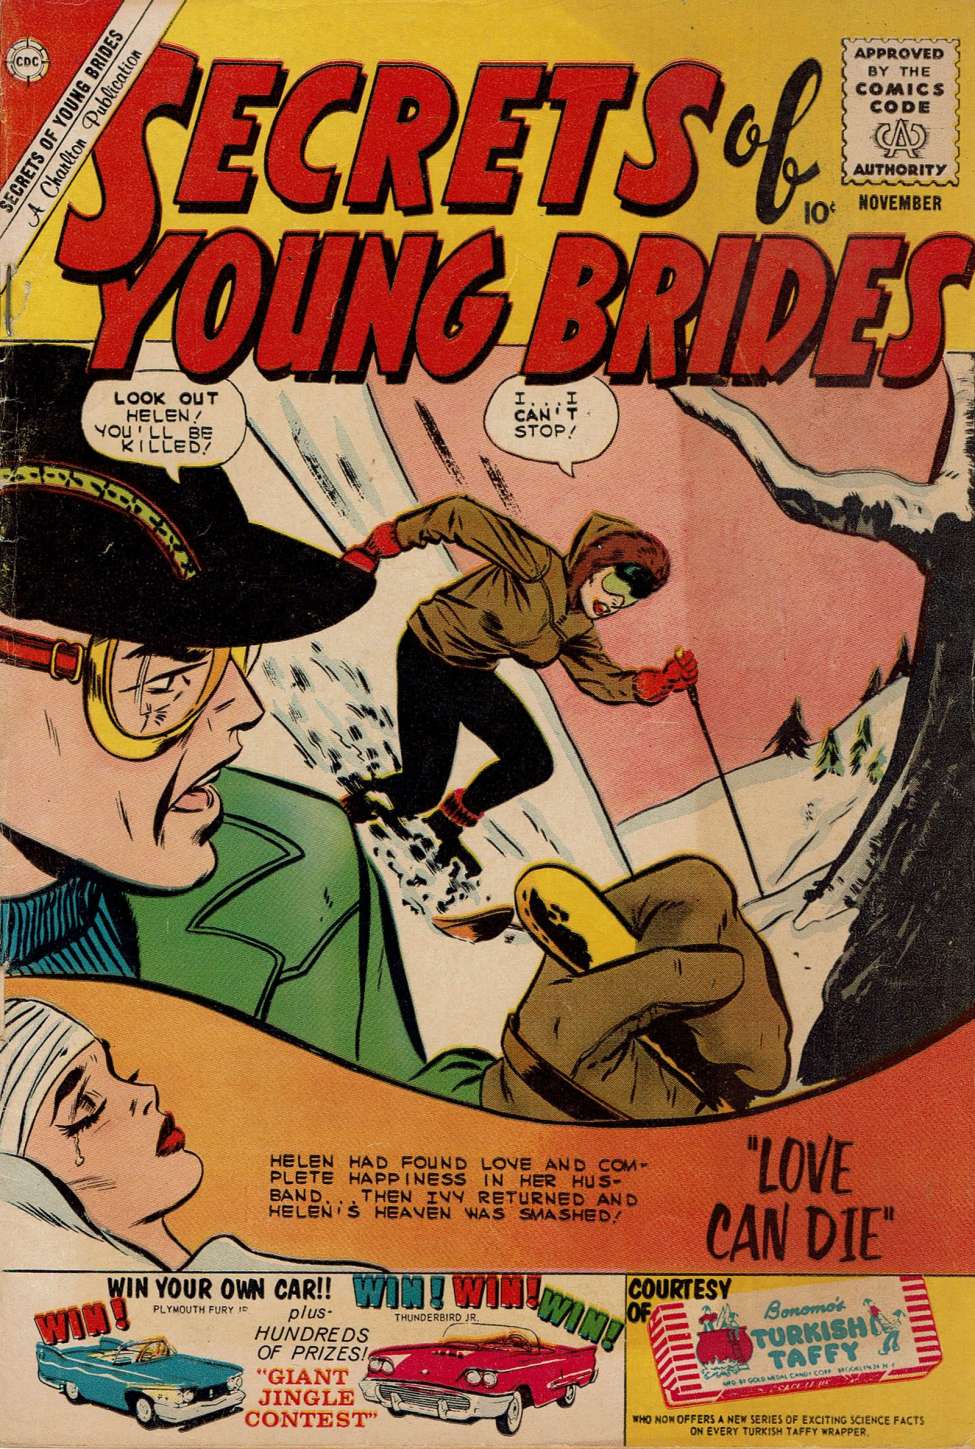 Book Cover For Secrets of Young Brides 22